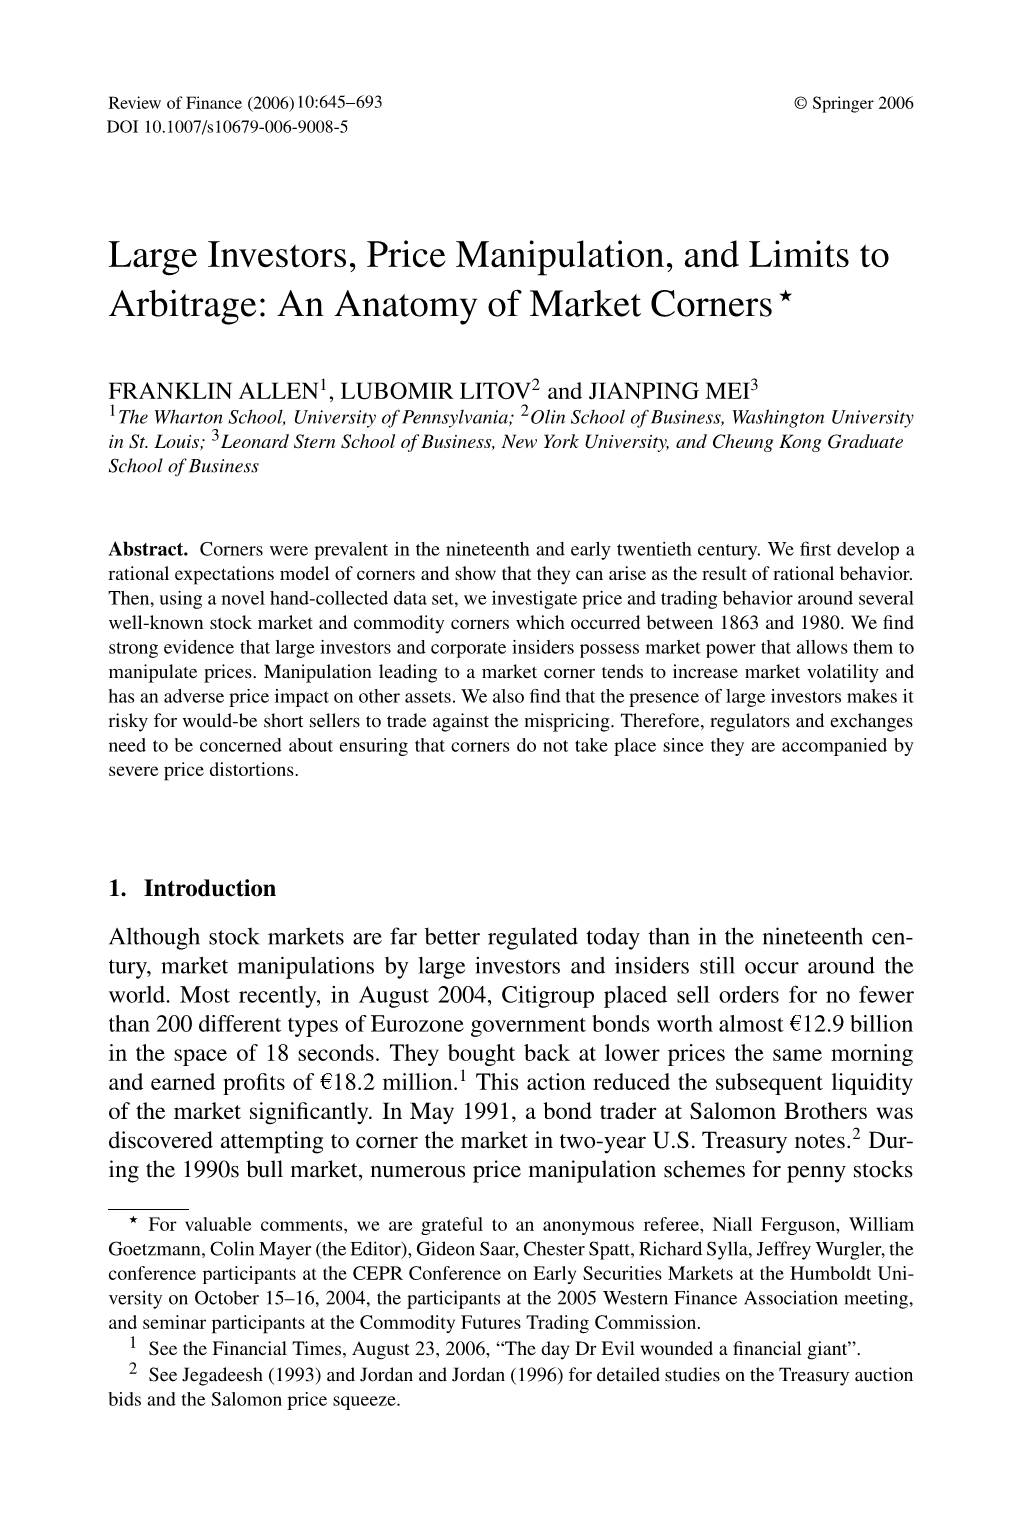 Large Investors, Price Manipulation, and Limits to Arbitrage: an Anatomy of Market Corners 